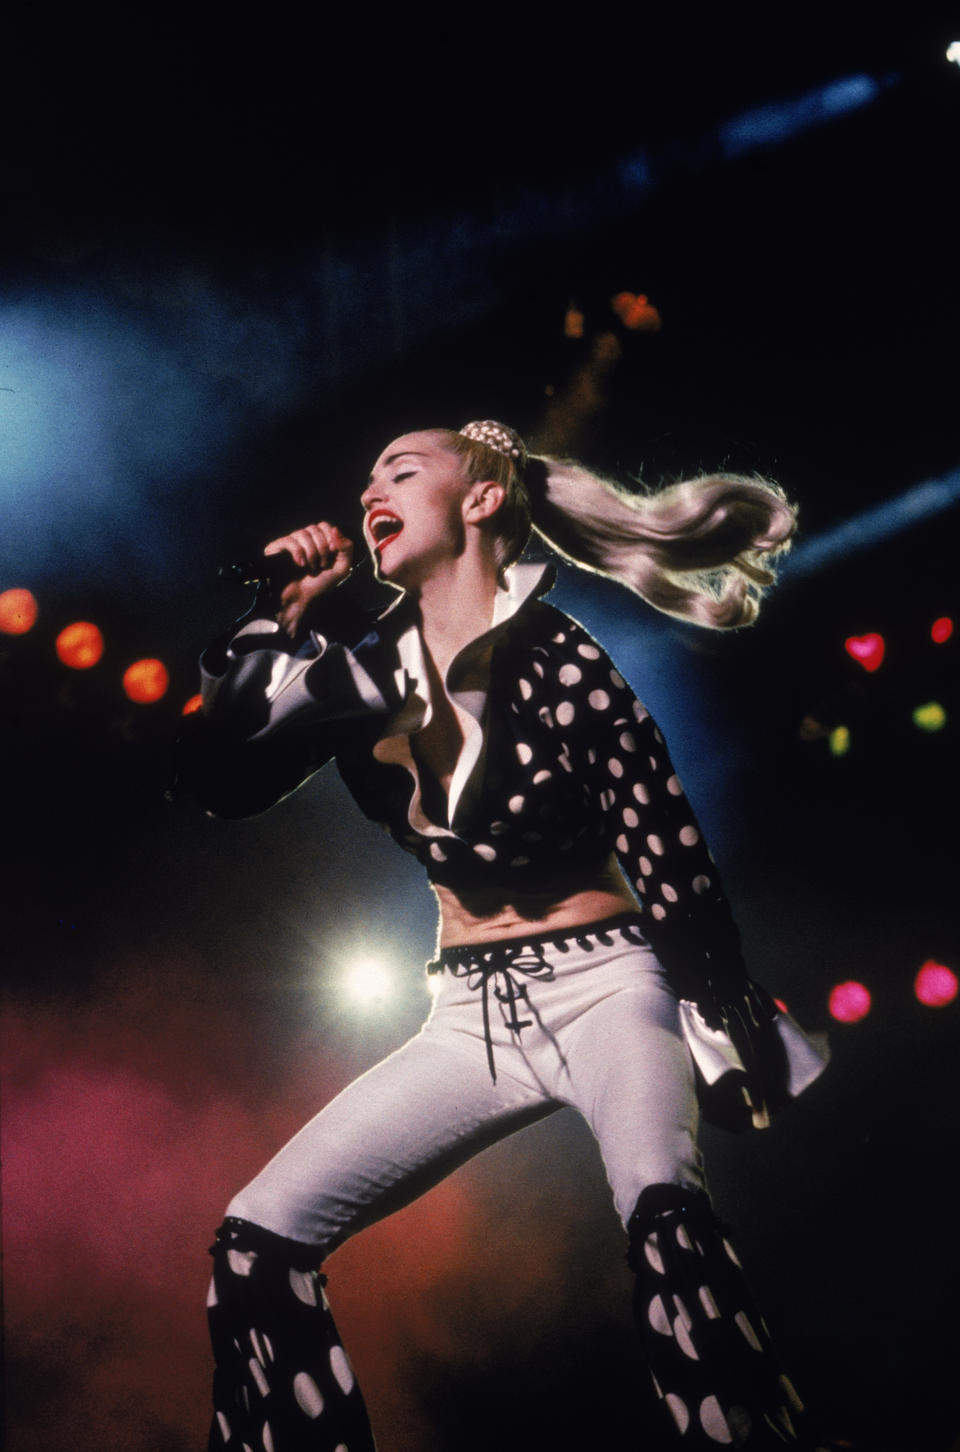  Madonna performs on stage in Kobe, Japan, April 1990. (Getty Images)